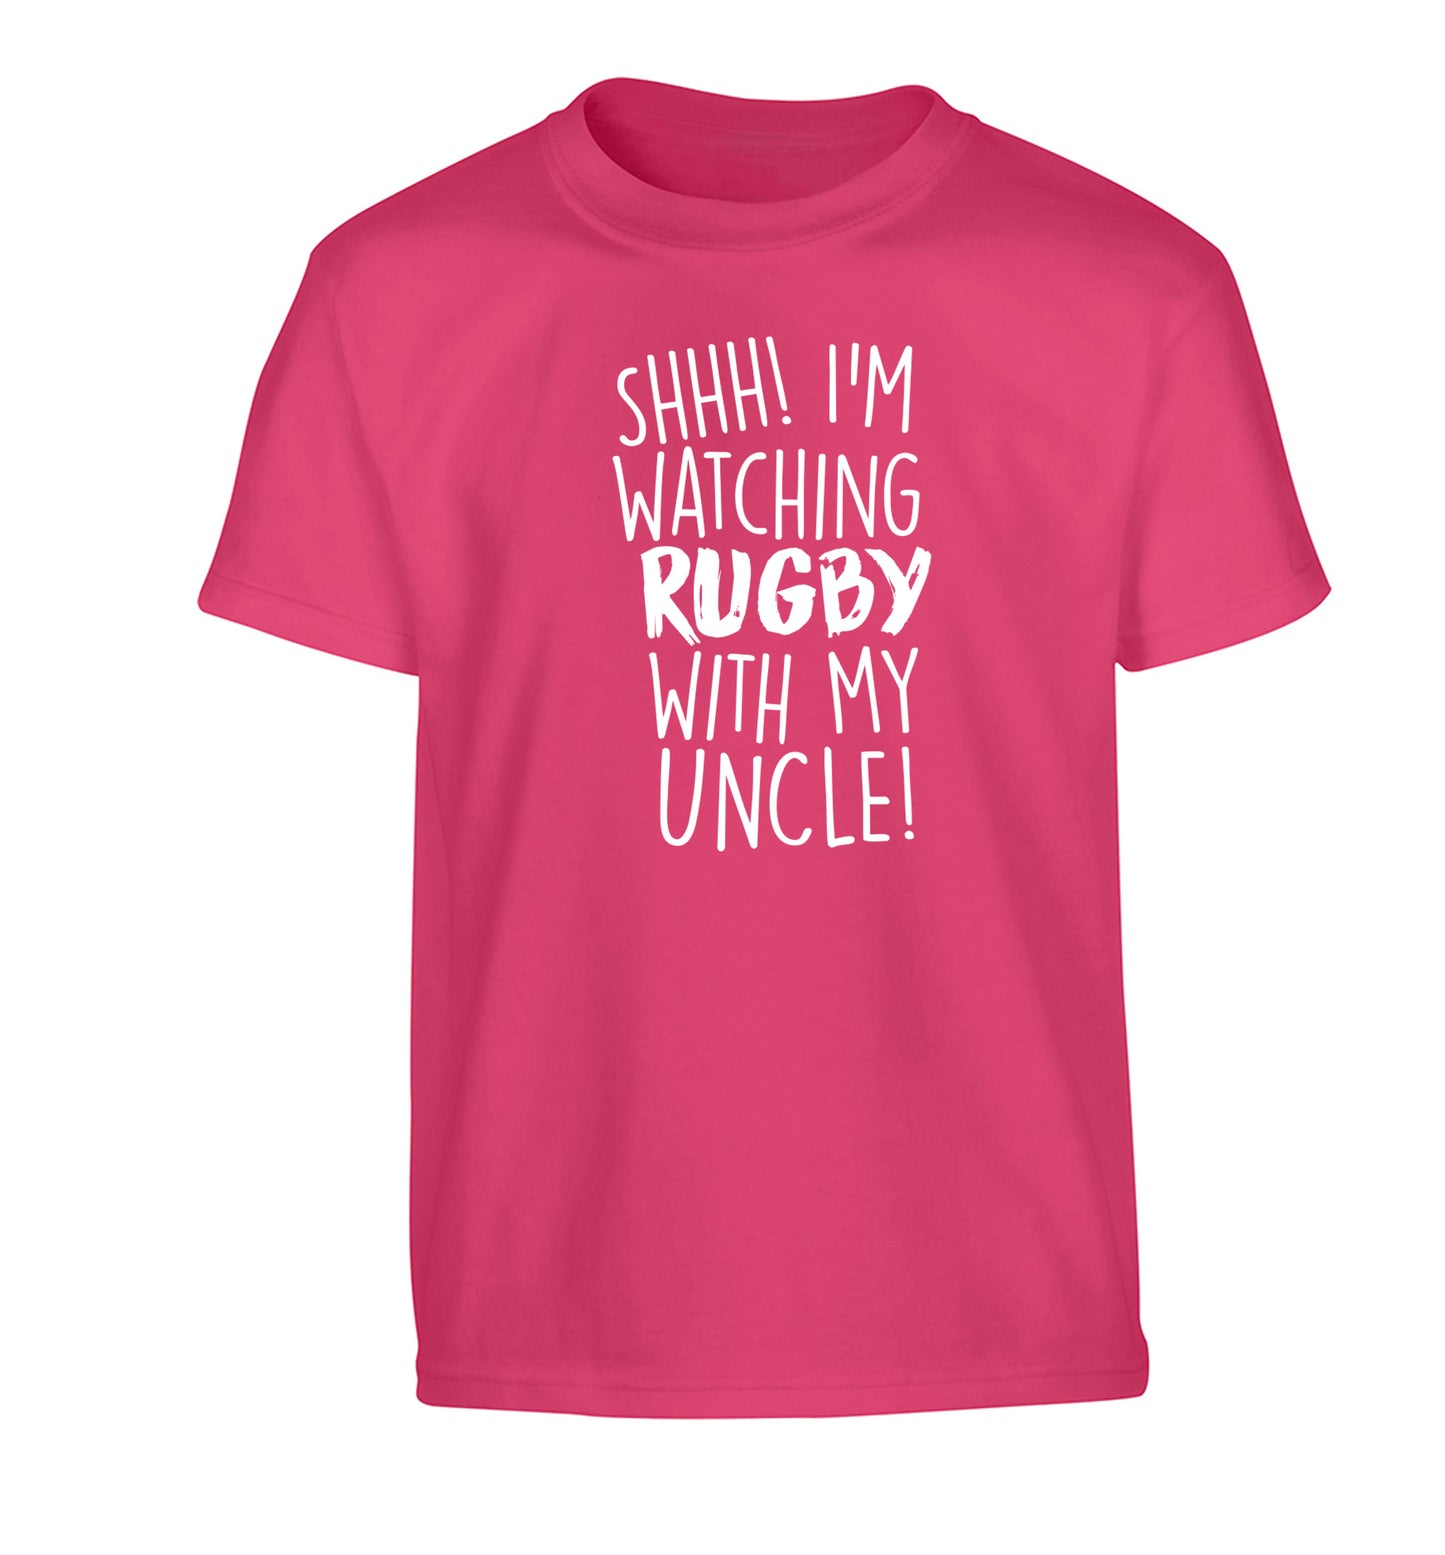 Shh.. I'm watching rugby with my uncle Children's pink Tshirt 12-13 Years